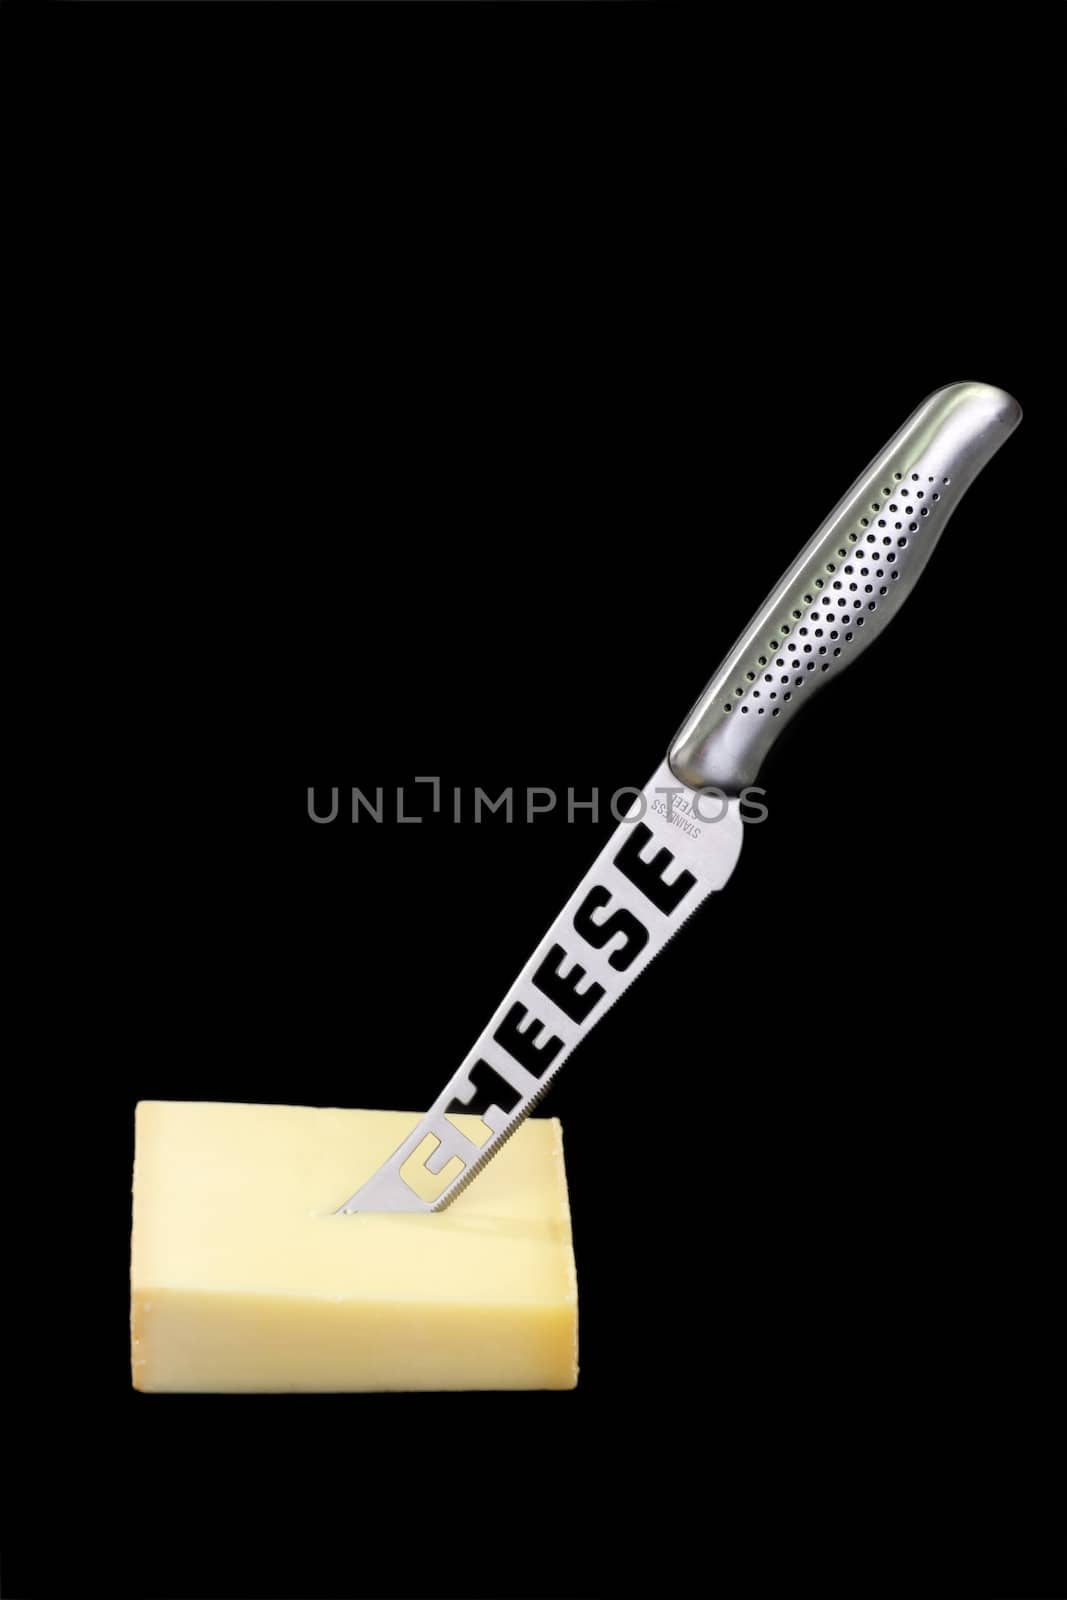 Piece of cheese with knife - isolated on white background